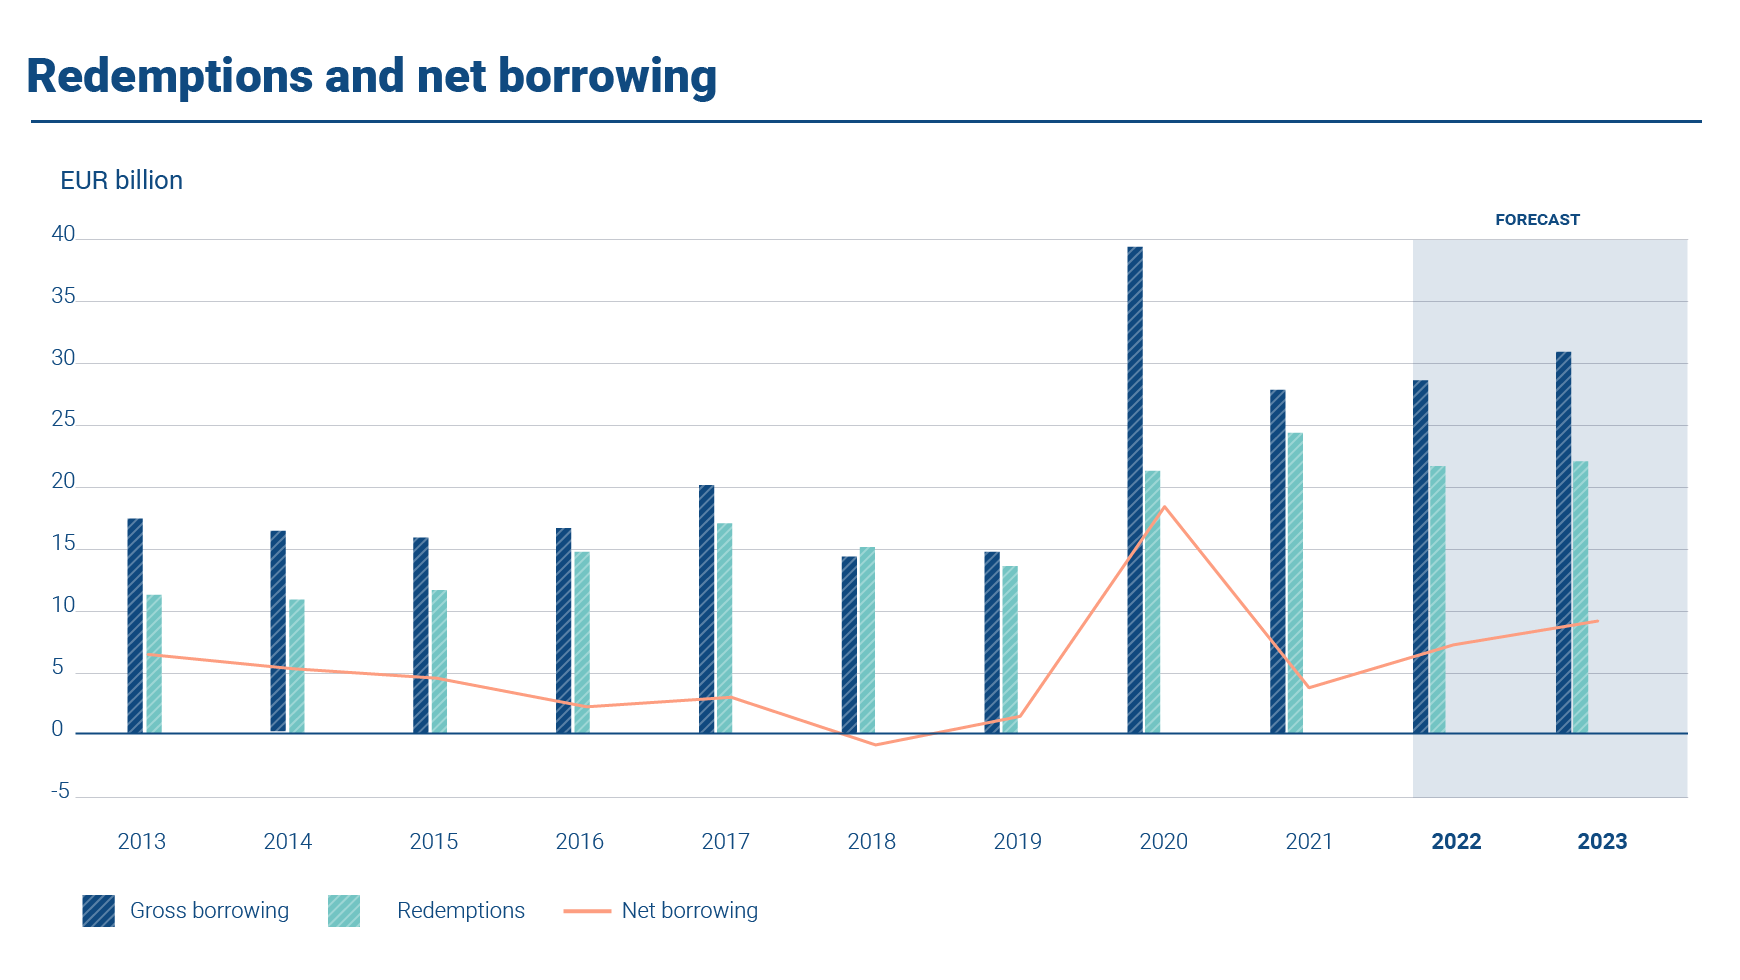 The graph shows annual gross borrowing, redemptions and net borrowing in 2013-2023. Redemptions of EUR 24.15 billion took place in 2021 while net borrowing amounted to EUR 3.68 billion.